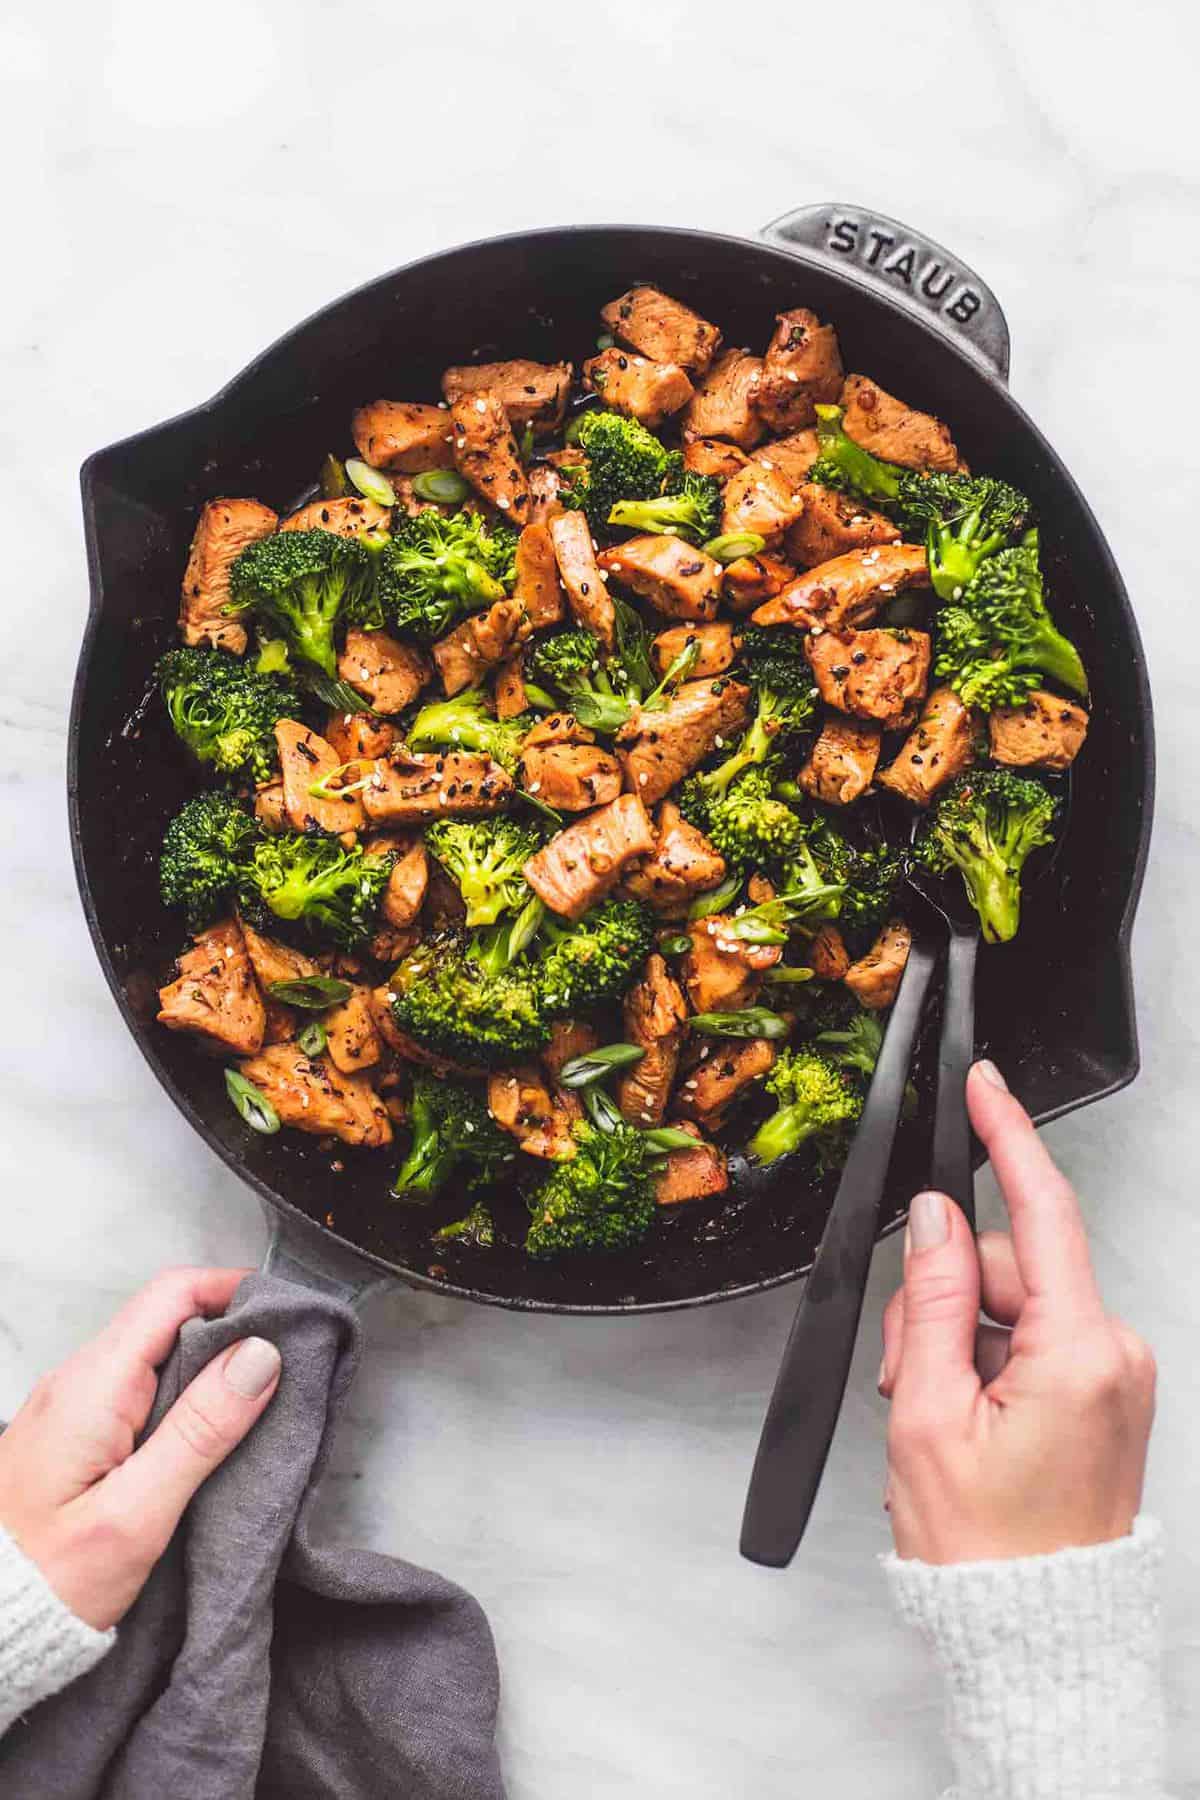 top view of chicken and broccoli stir fry in a pan with a hand on the handle and another hand on one of the serving swoons in the pan.